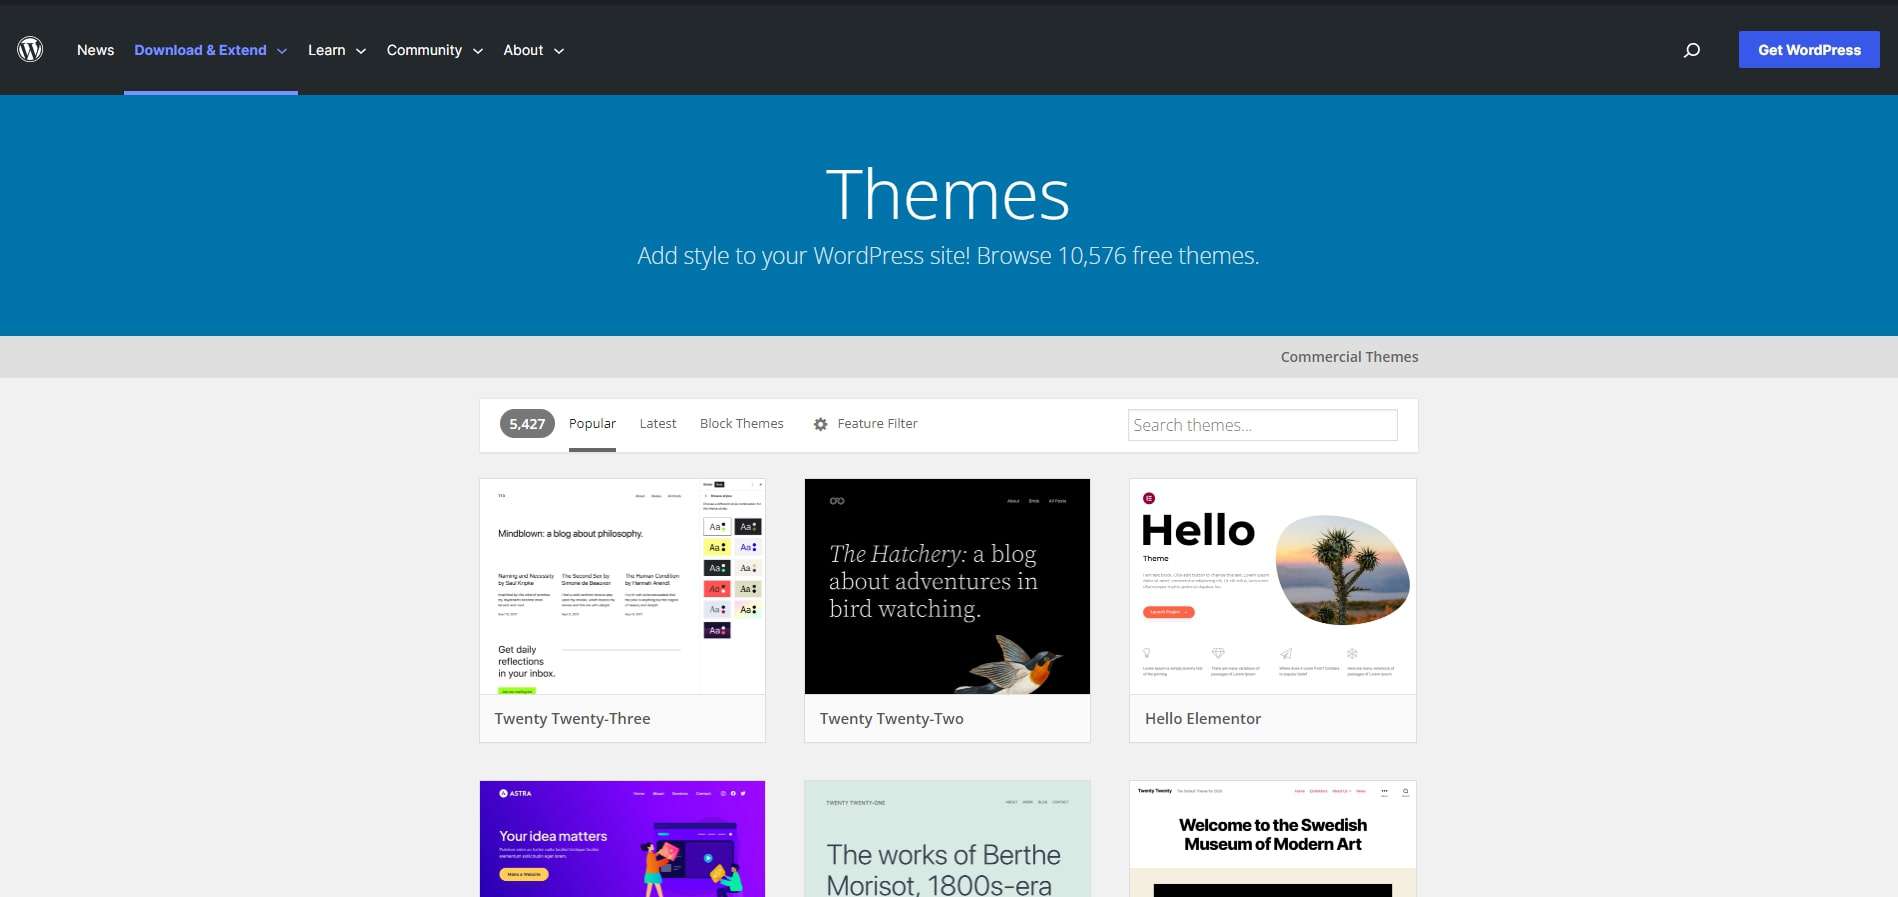 The WordPress theme directory has a wide array of designs you can choose for your website.